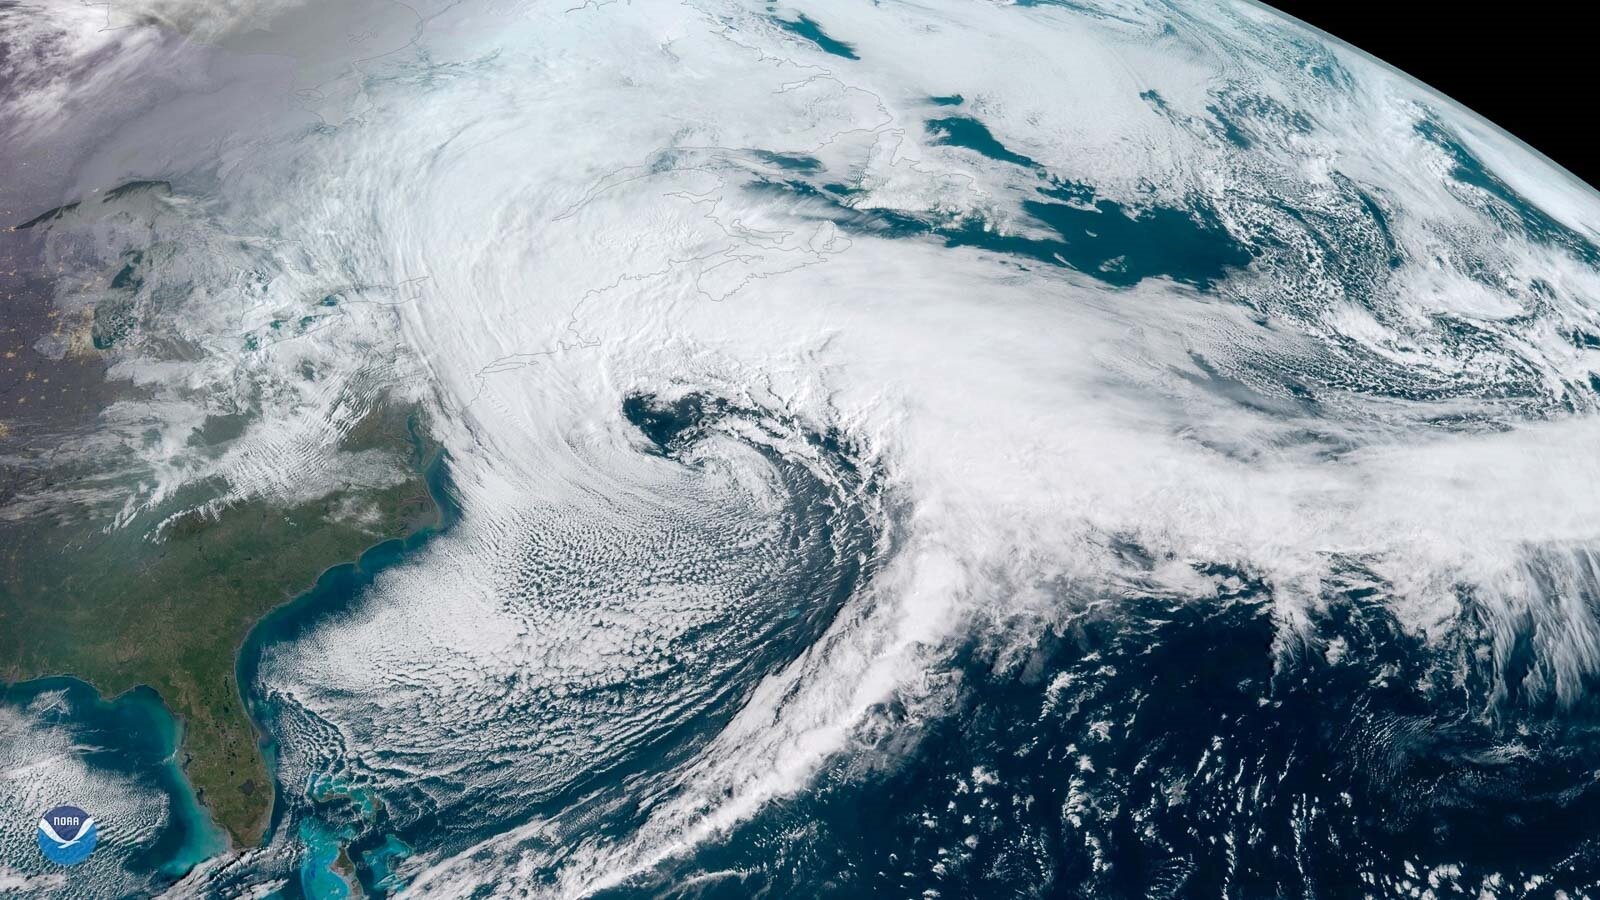 Innovative models predict effects of climate change on nor'easters - Phys.org